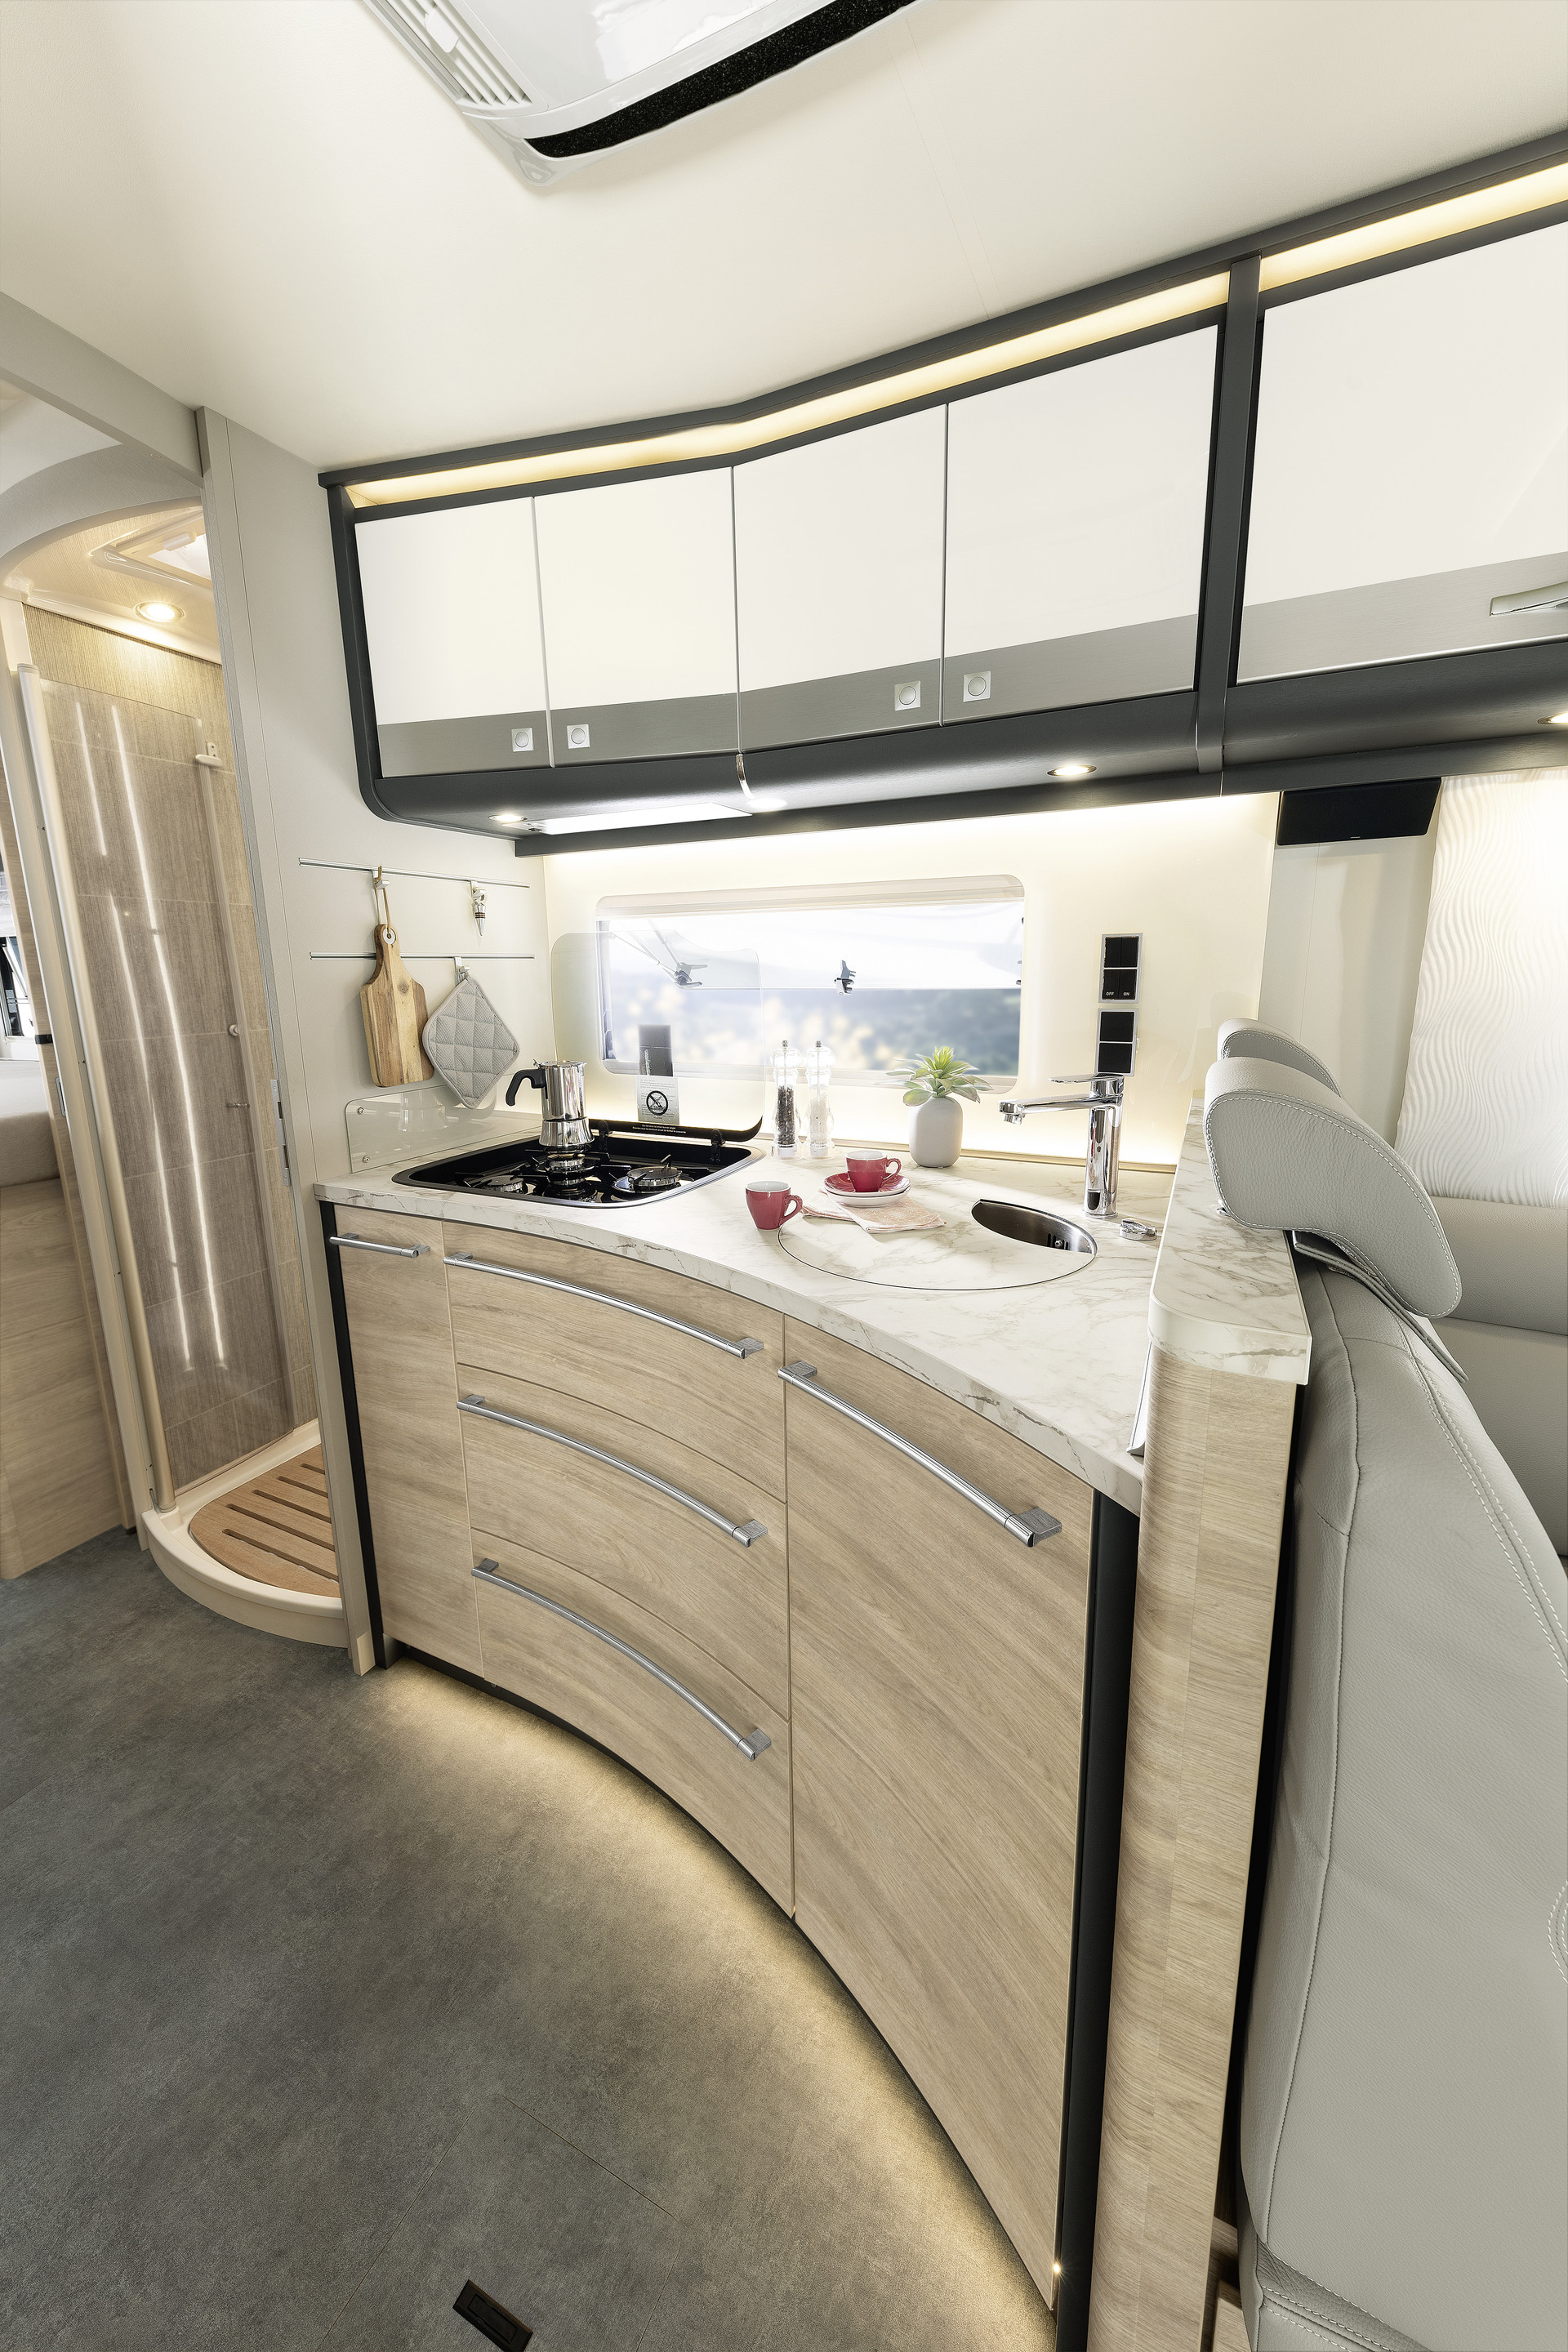 Big motorhome, big cooking fun! The Globetrotter XXL A offers an abundance of space and elbow room – in a befittingly exclusive design